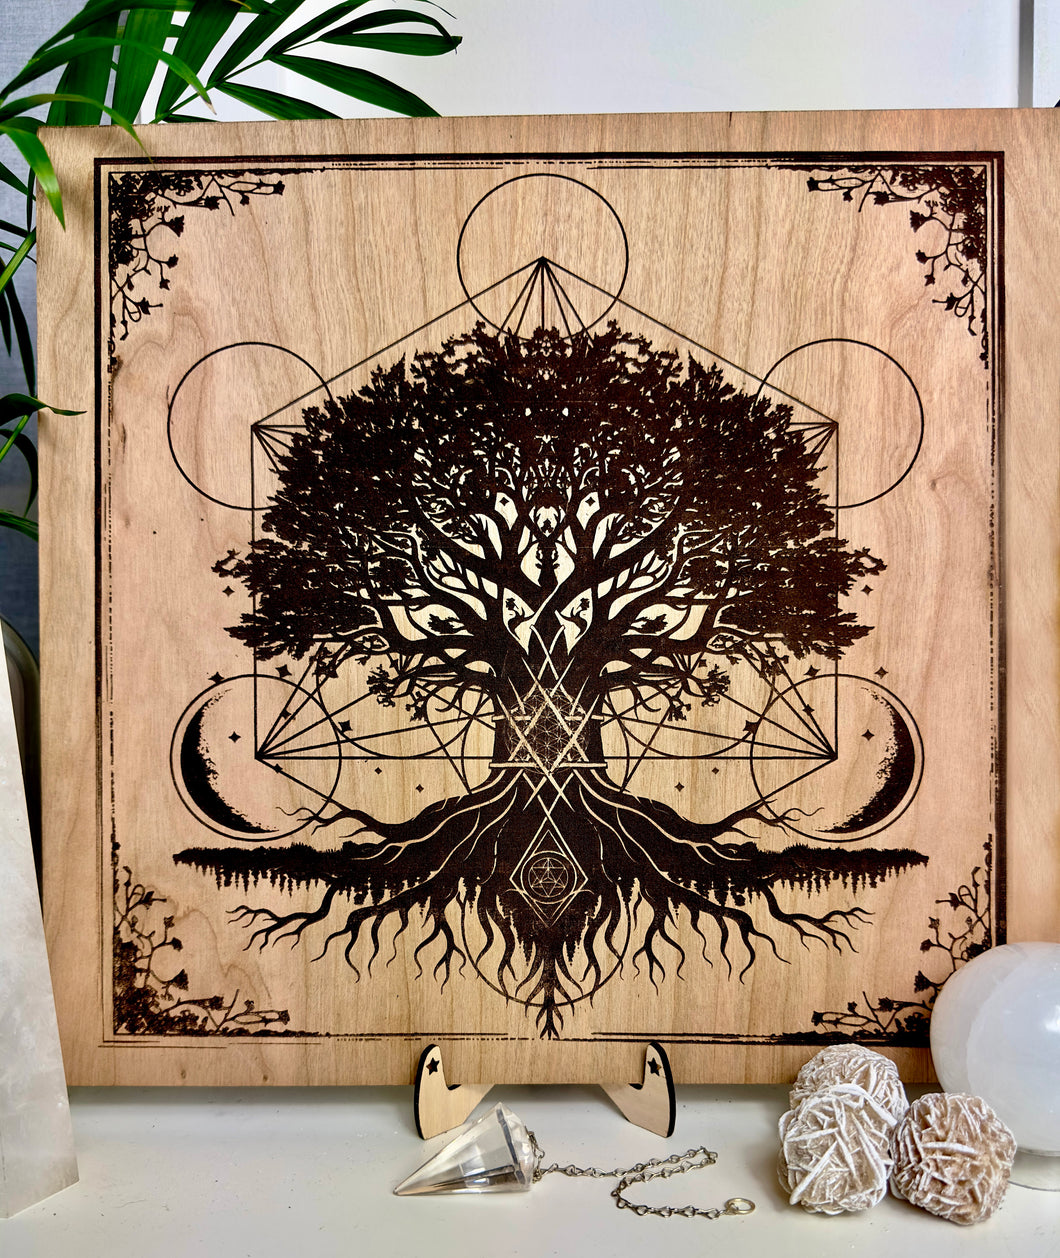 Ancestral healing / family tree Grid amazing for scared alters or specific ancestry healing alters